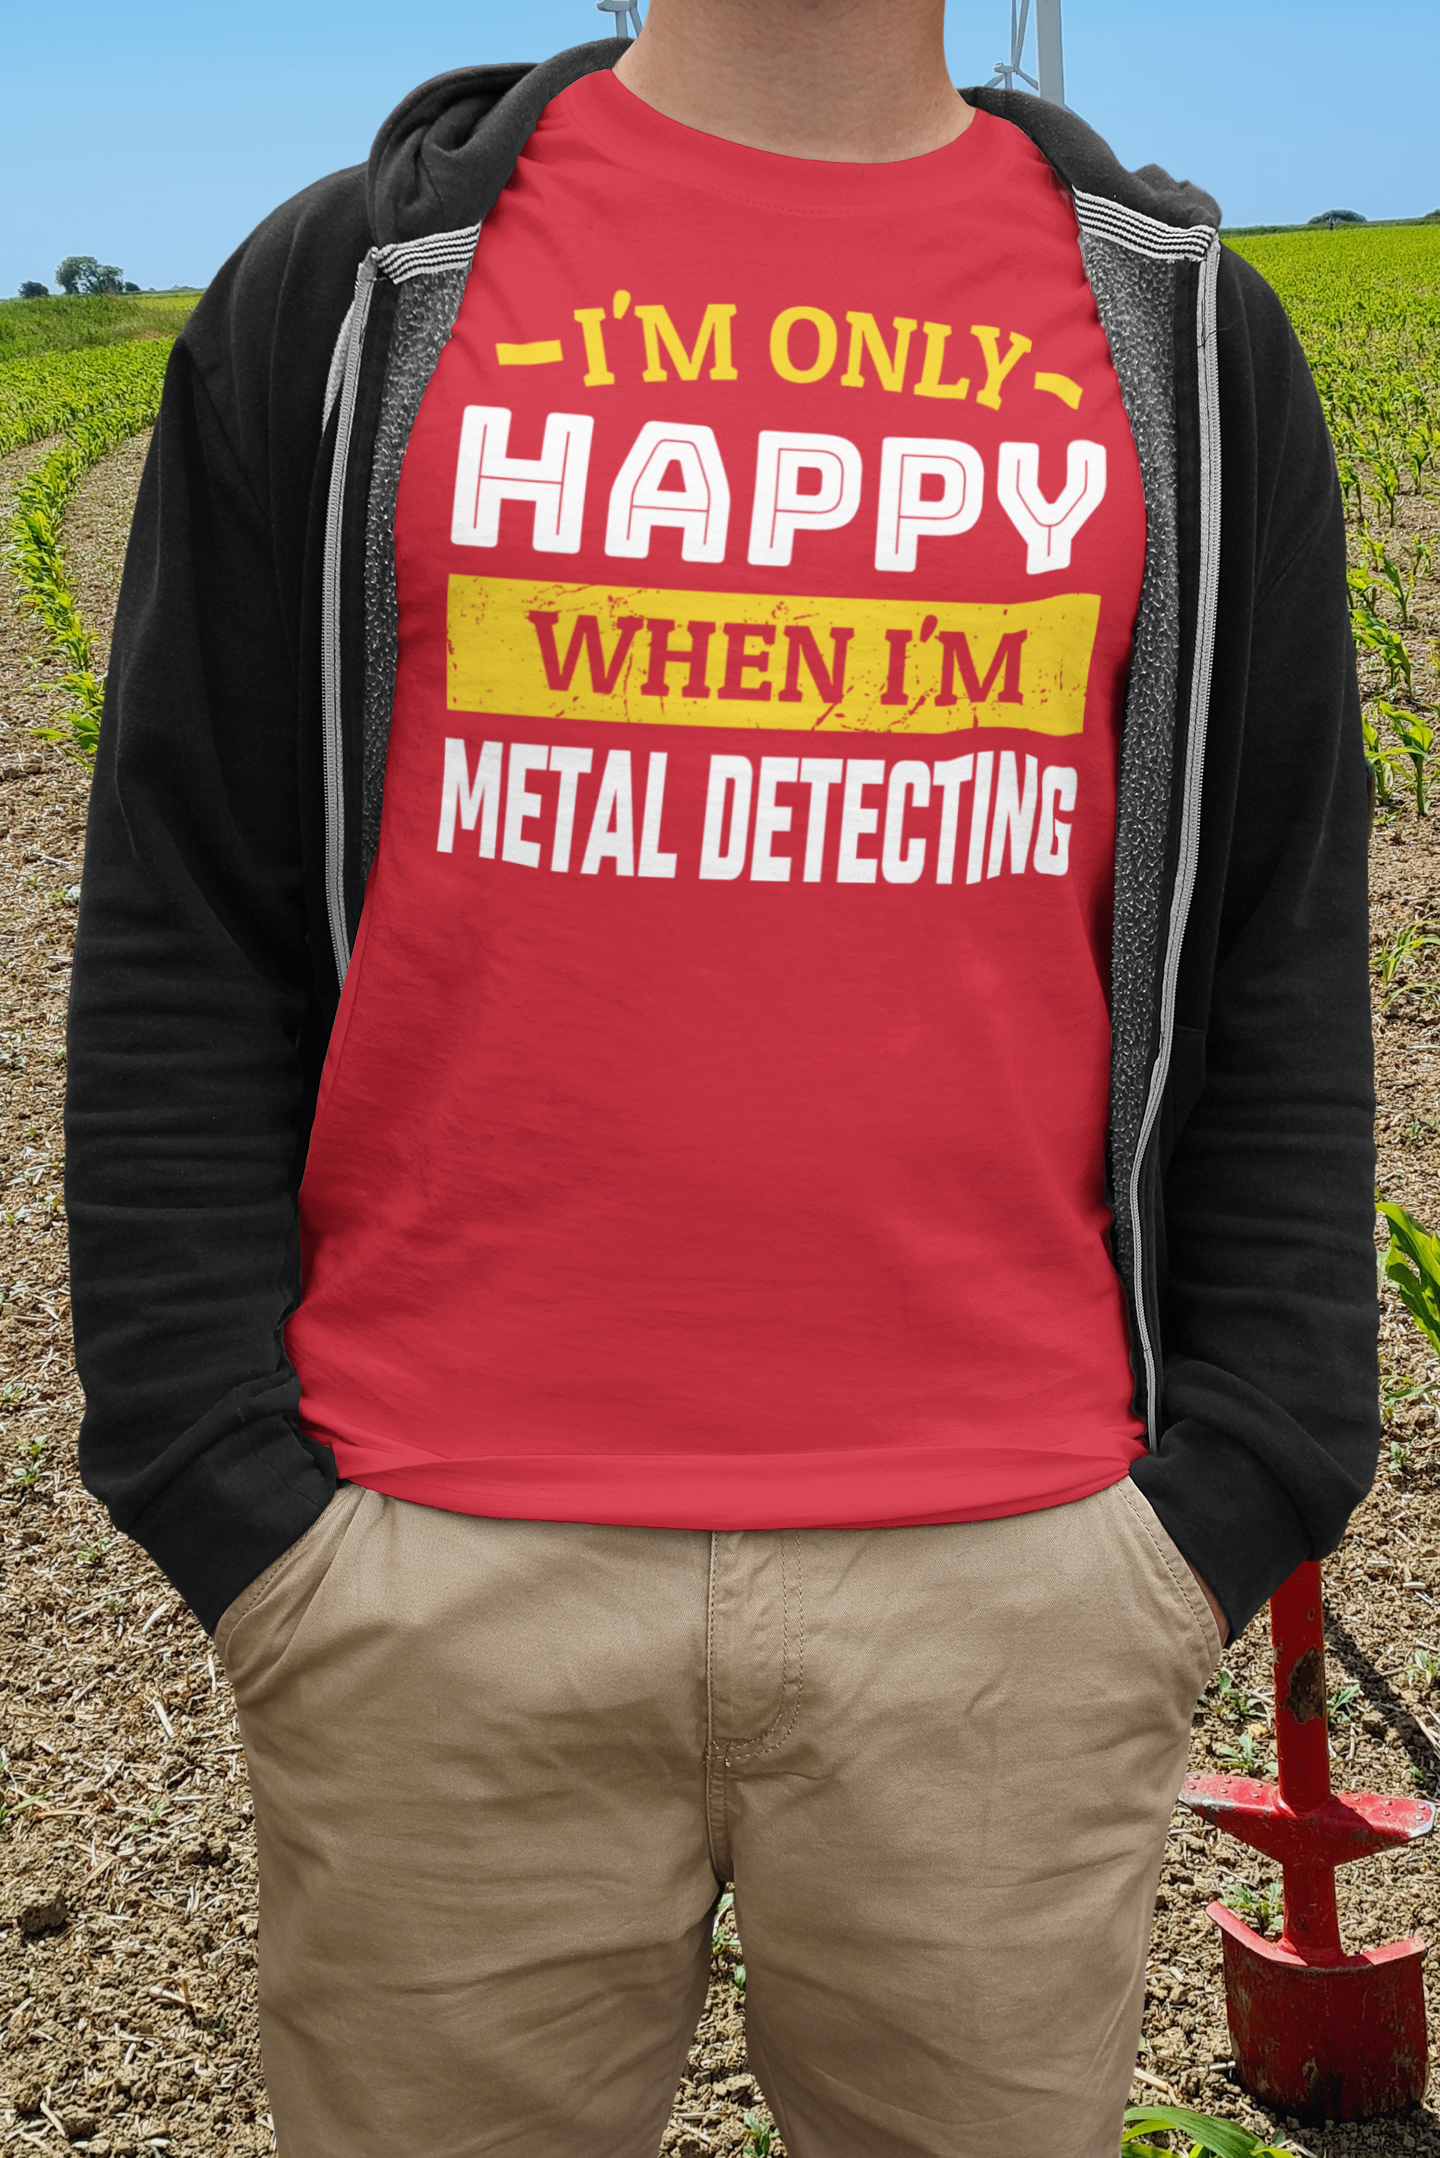 I'm only happy when I'm metal detecting T-shirt